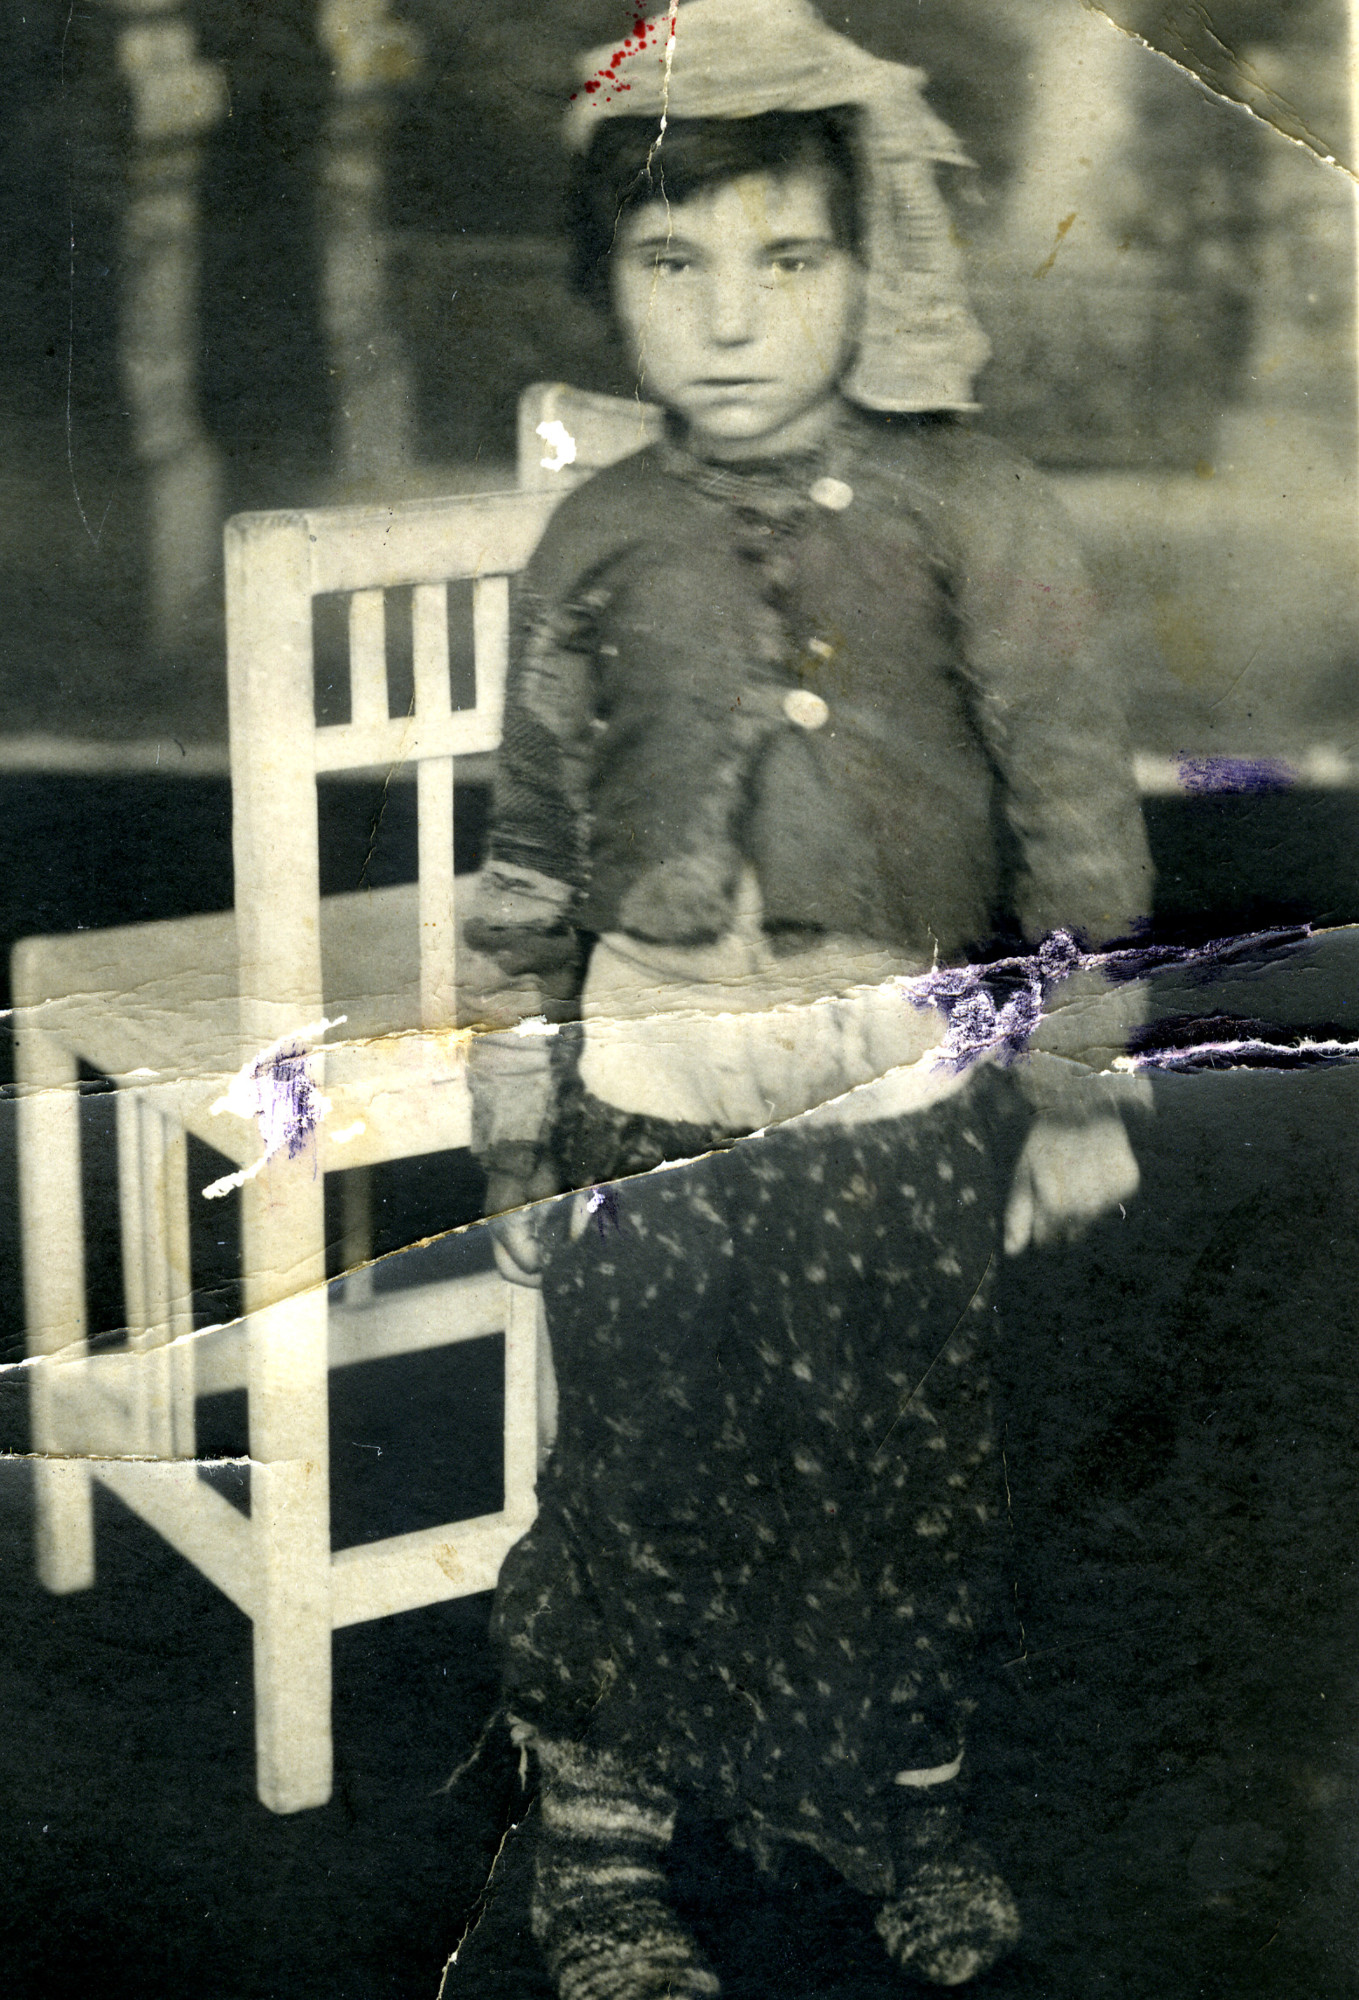 Portrait of five-year-old Ester Bachar (later Levi), shortly after the war.

Ester was hidden by a Roma family during the war.